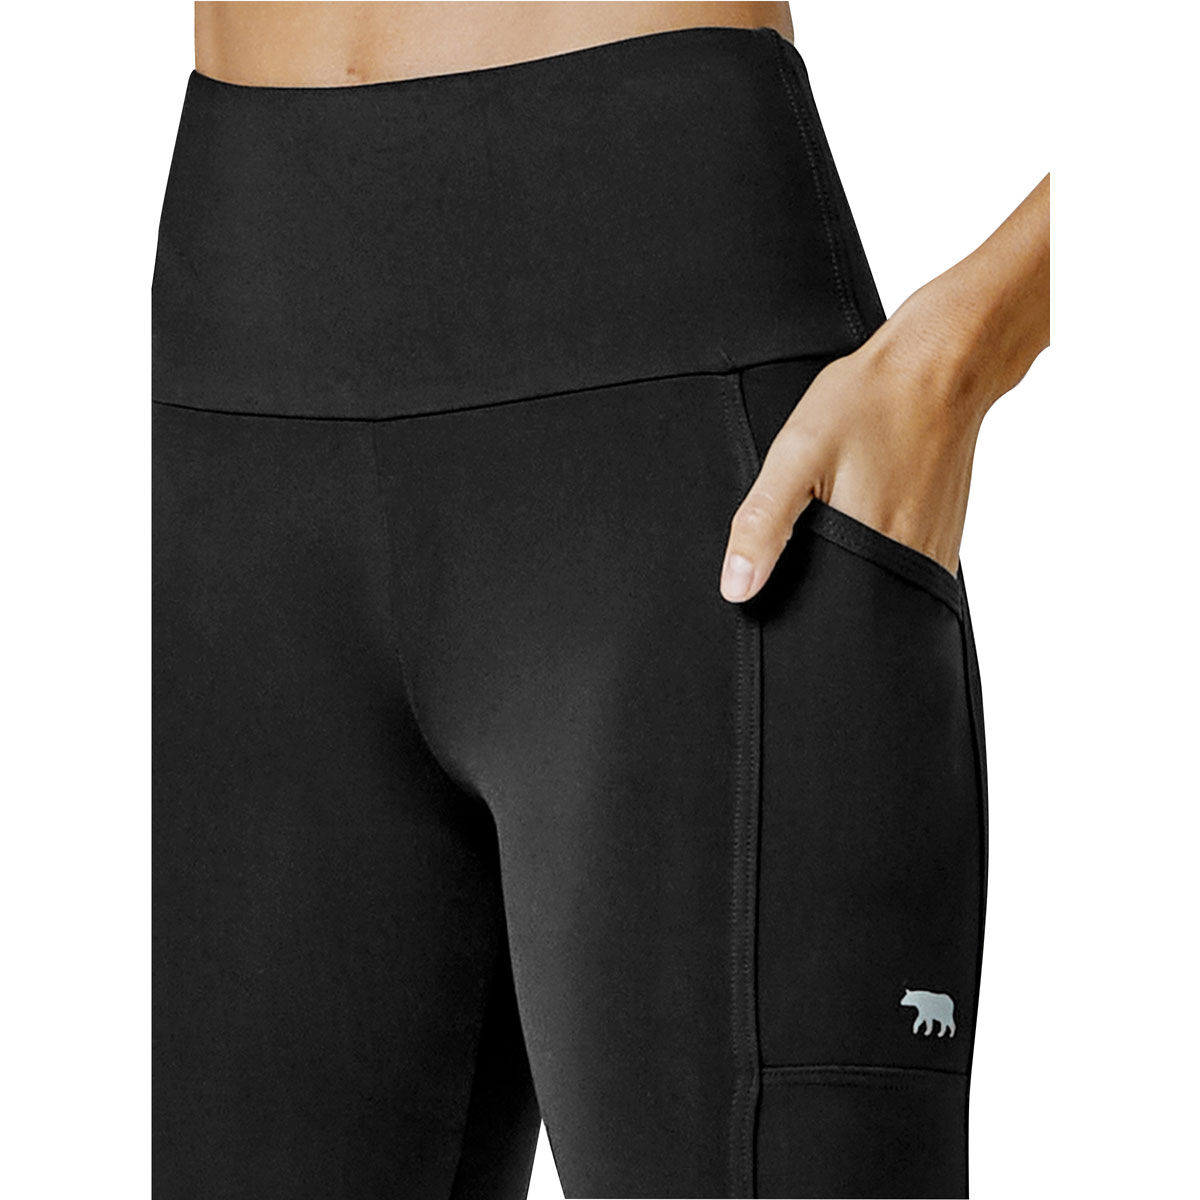 Womens Tights with Pockets. Running Bare Power Moves 3/4 Leggings